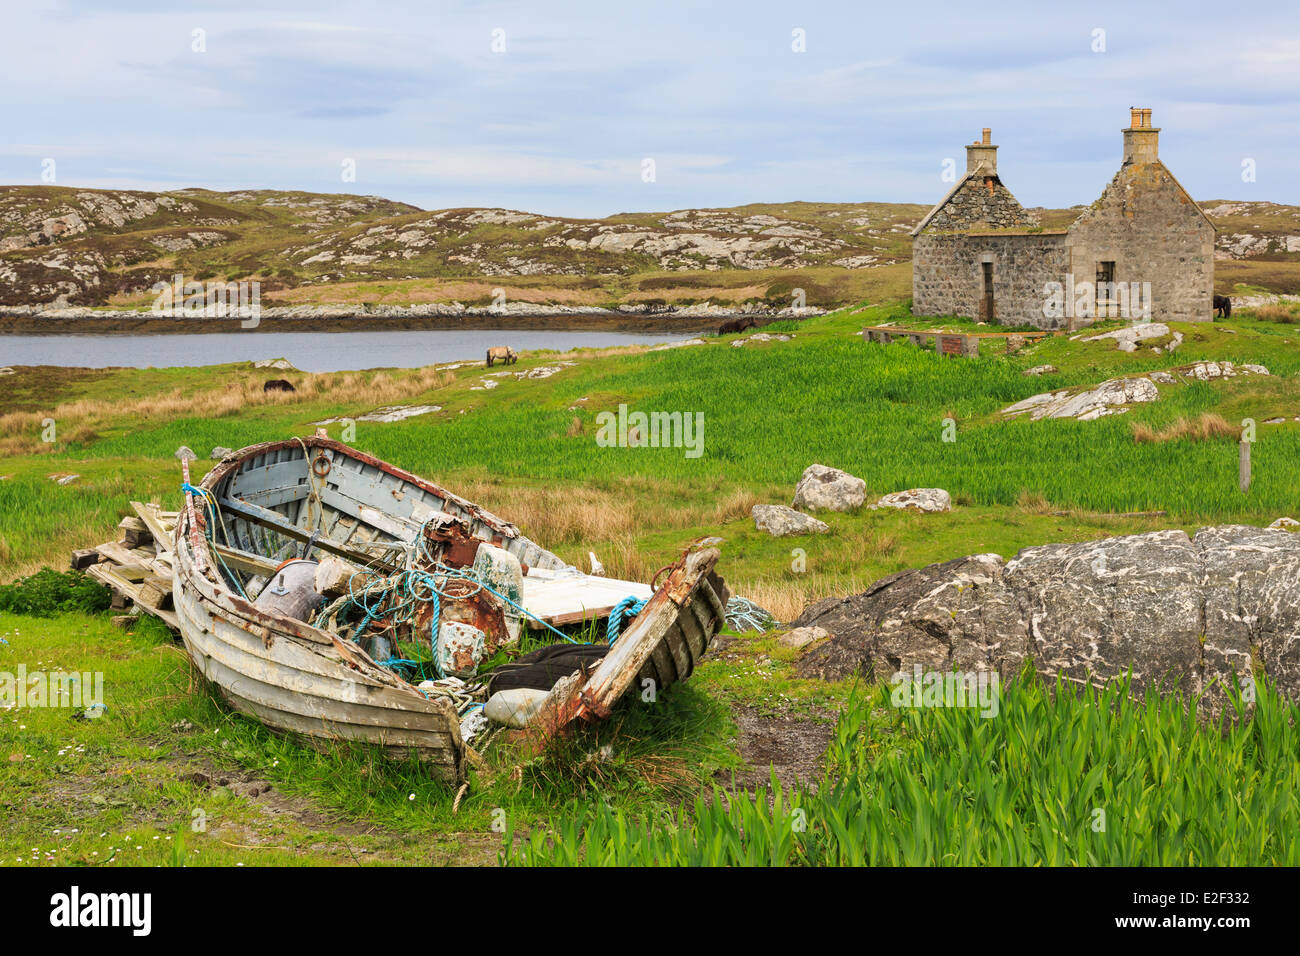 Hebridean scene with old fishing boat and abandoned ruined croft by Loch Sgioport South Uist Outer Hebrides Western Isles Scotland UK Britain Stock Photo